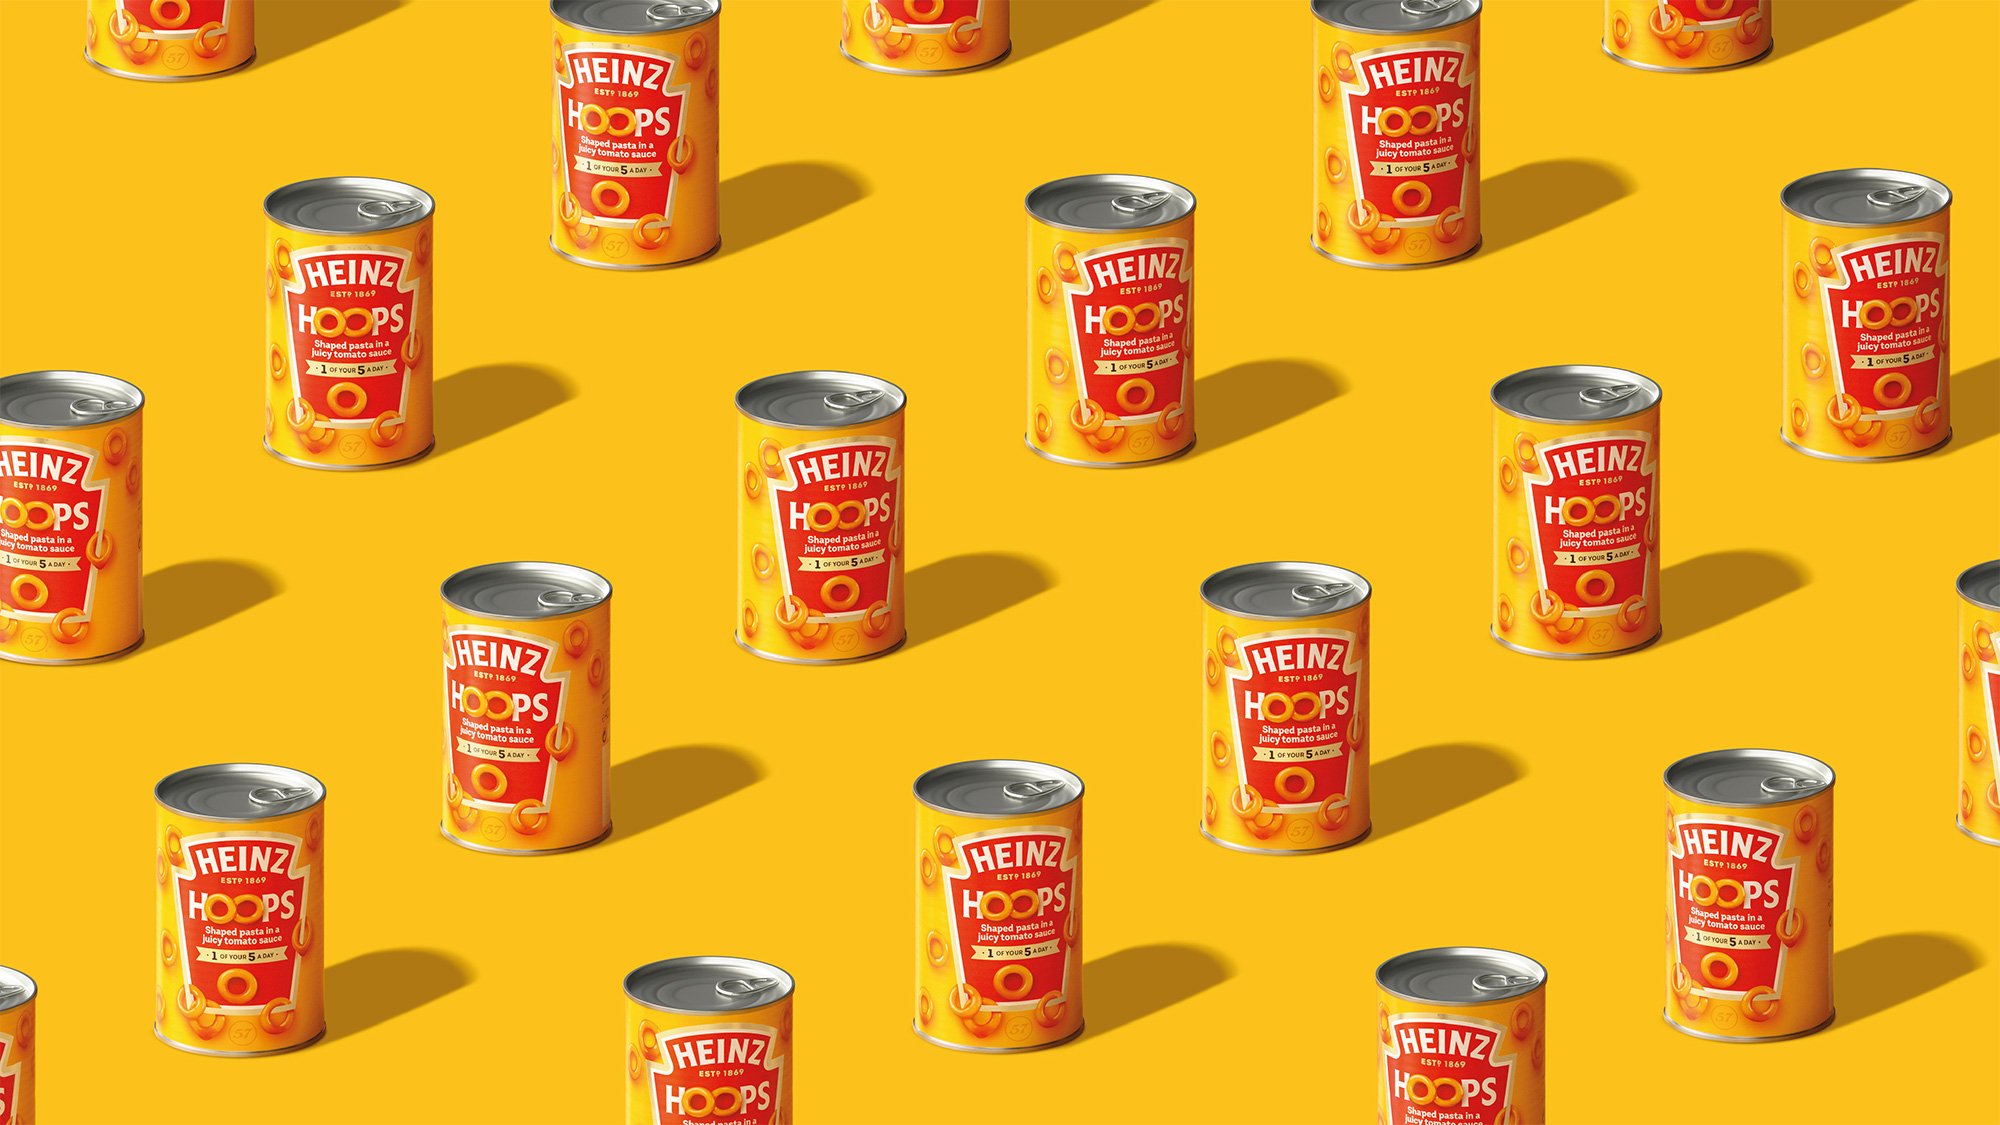 Brand New: New Master Brand for Heinz by Jones Knowles Ritchie